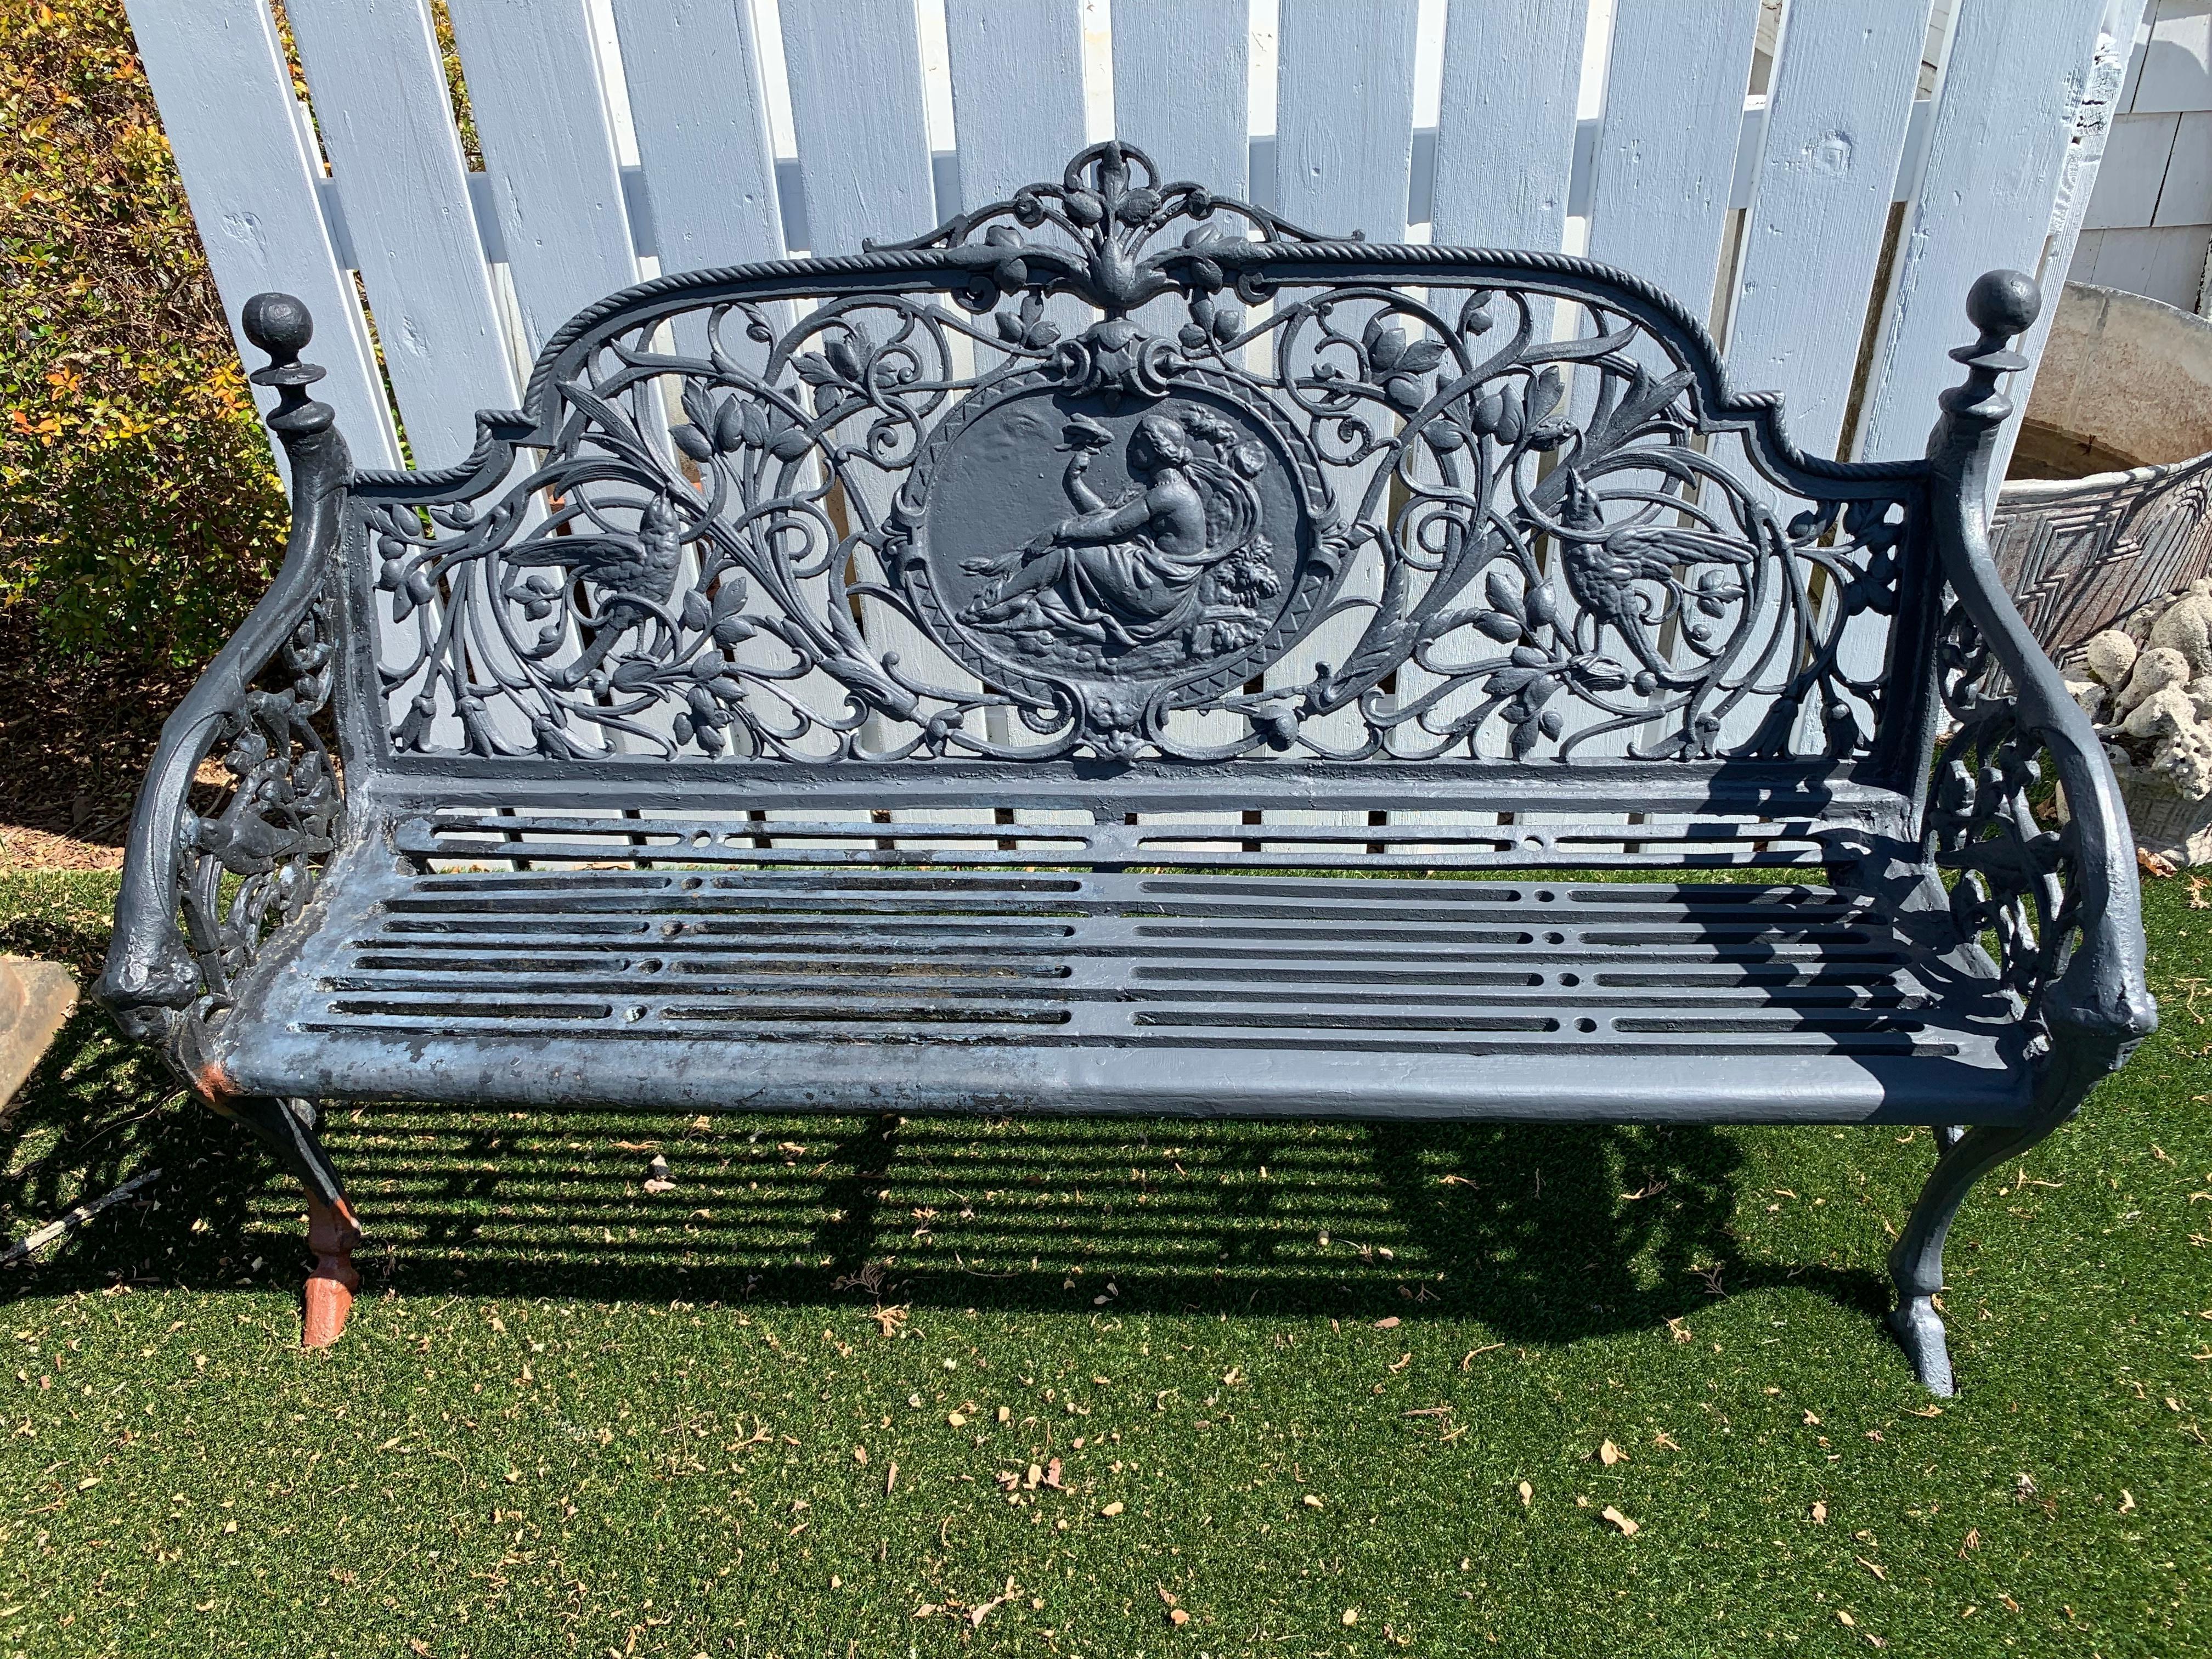 Magnificent vintage black iron bench with ornate decoration having central oval mandala with seated nymph surrounded by intertwining vines, birds, and foliage. Note: Pair available
Measures: arm height 26